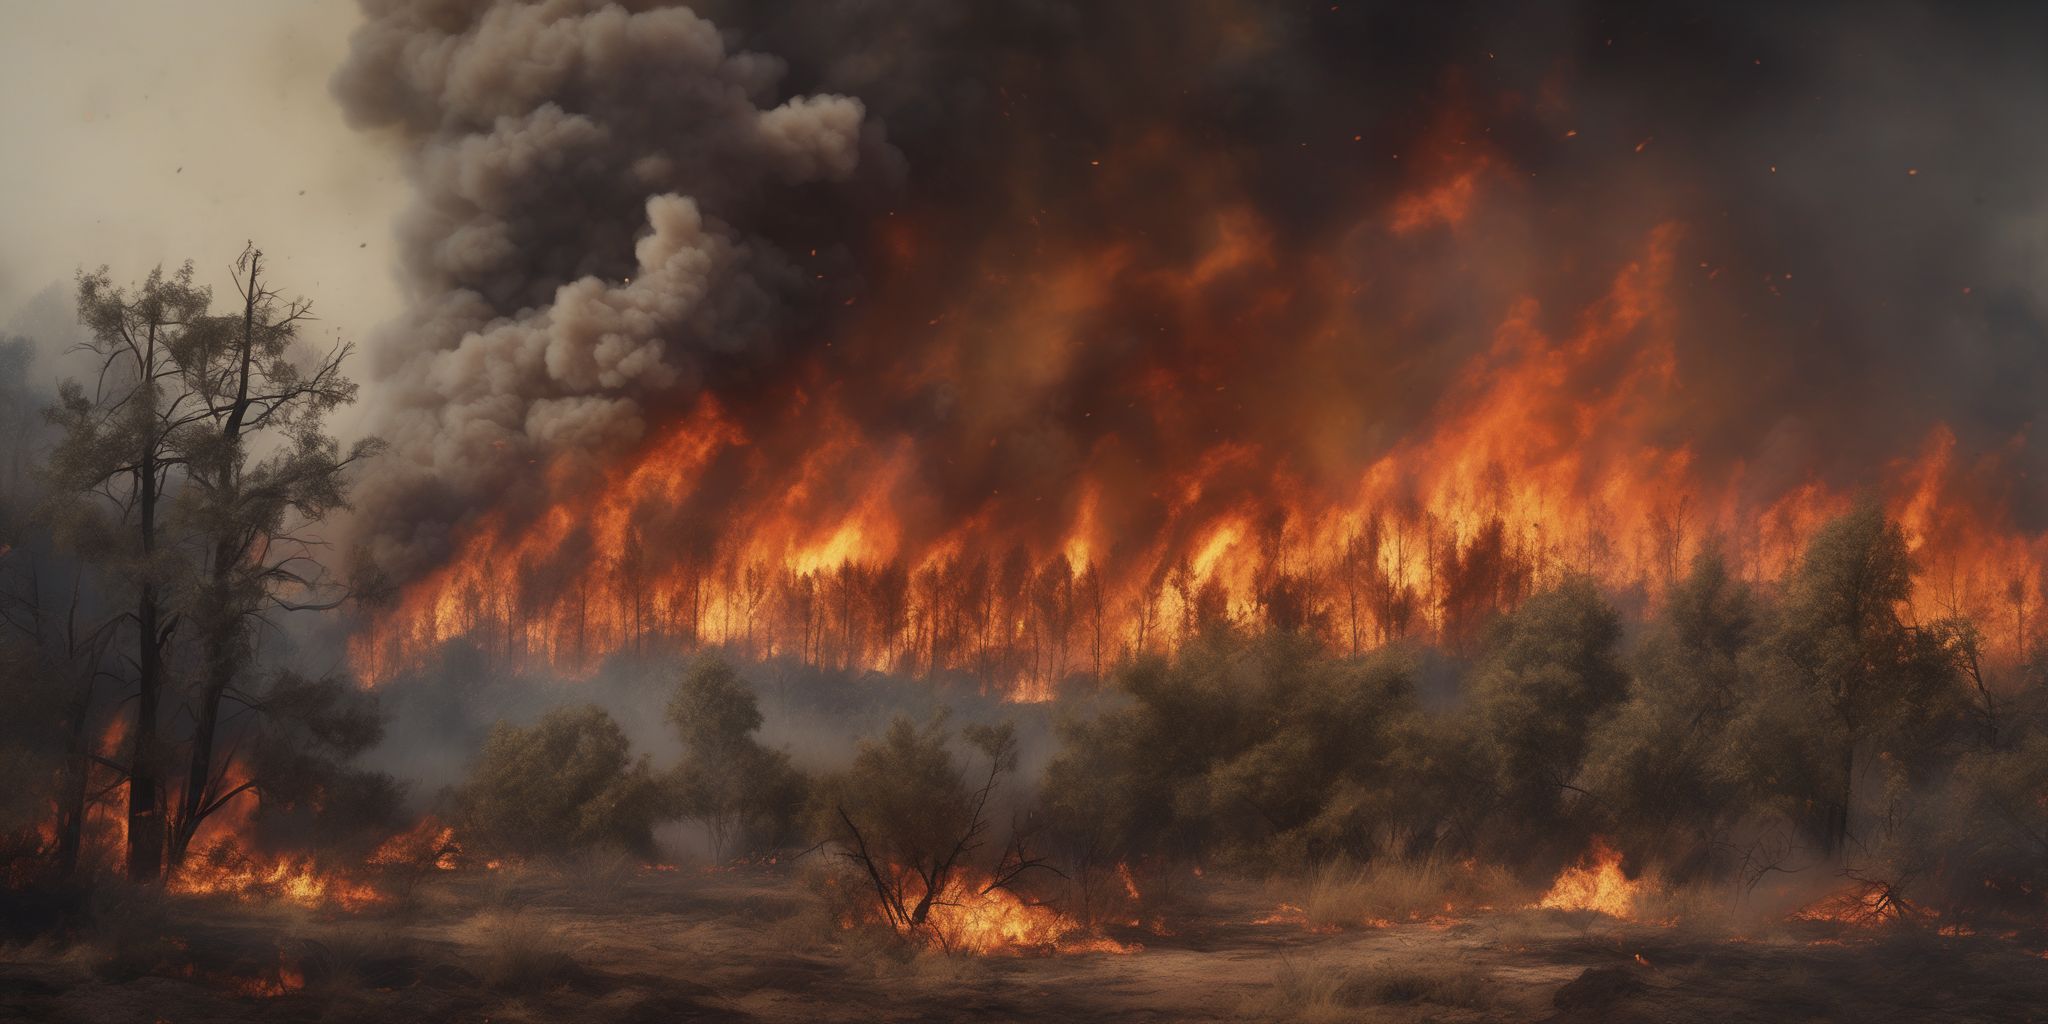 Wildfire  in realistic, photographic style